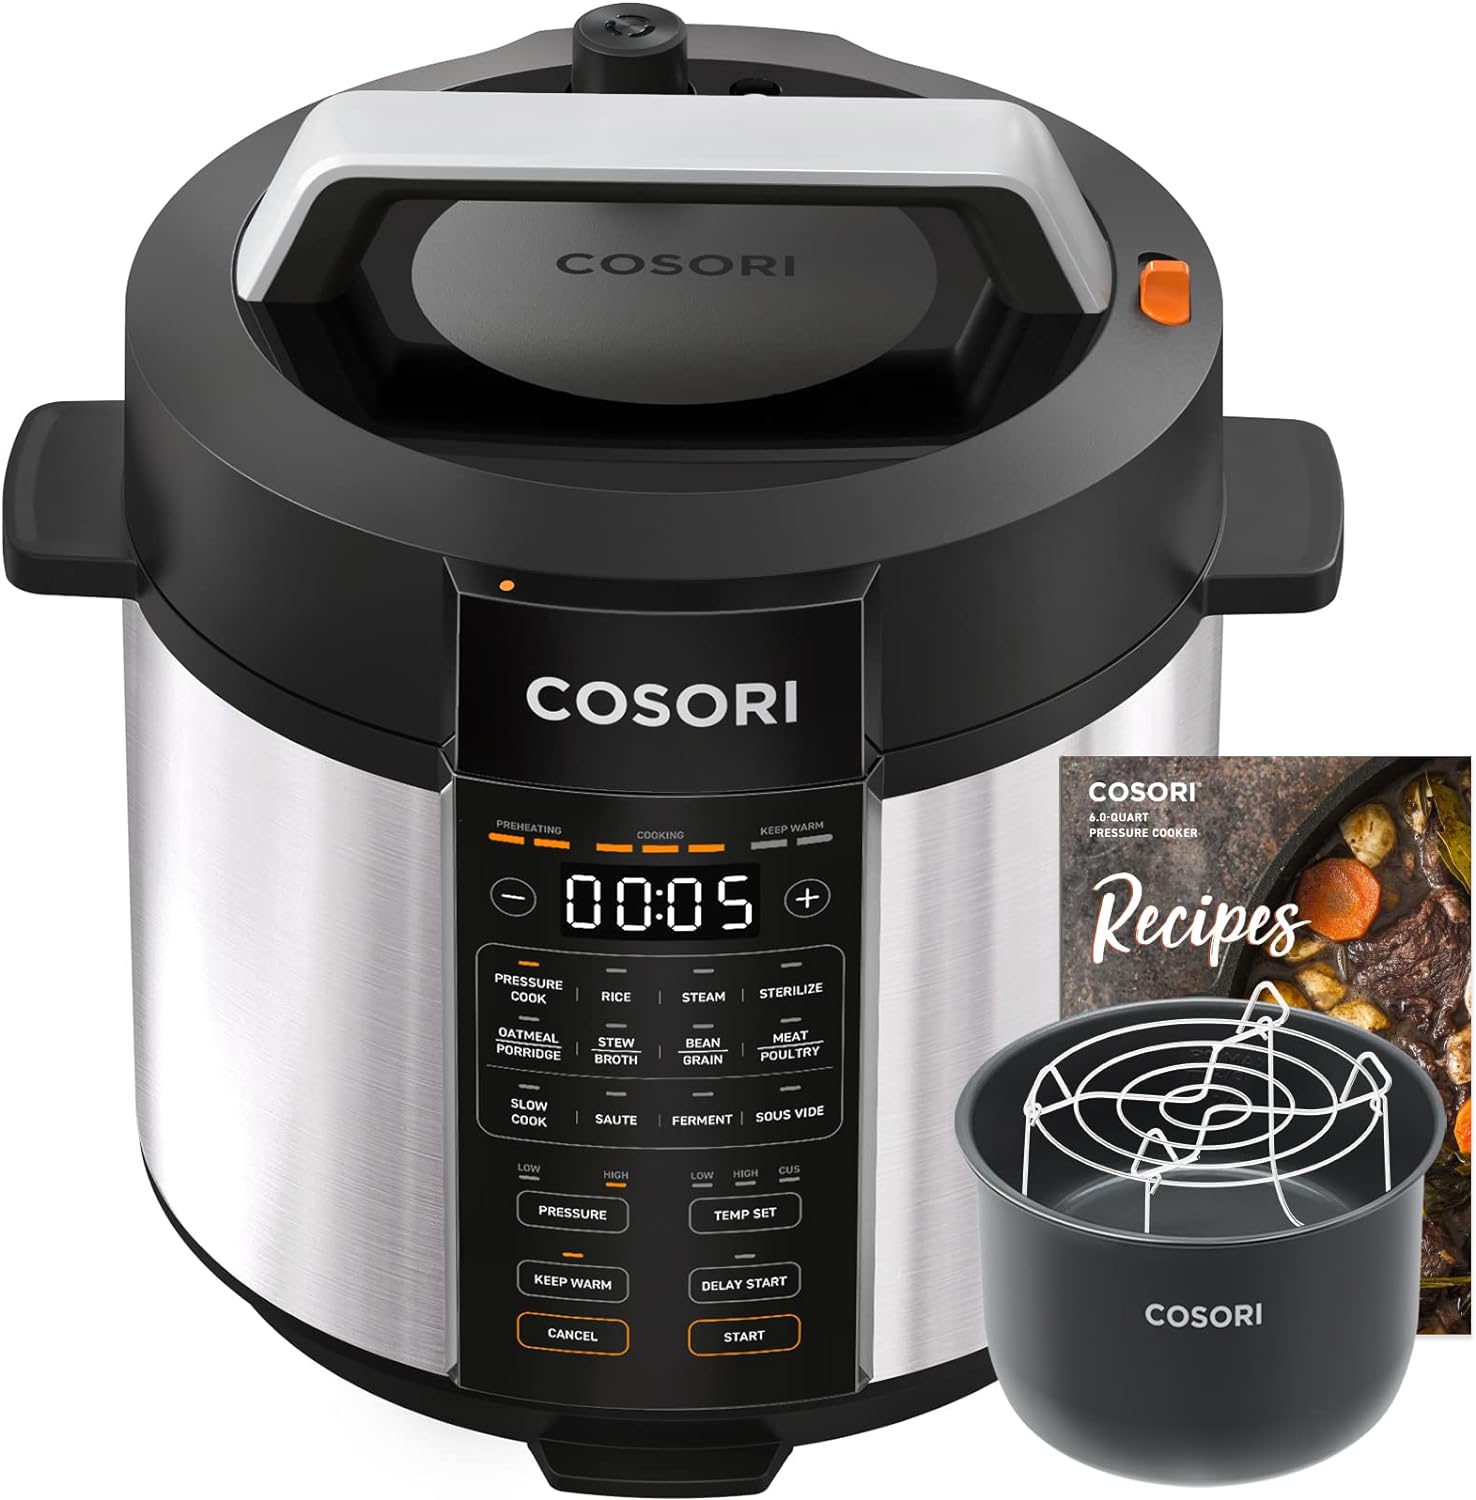 COSORI Electric Pressure Cooker 6 qt, 9-in-1 Instant Multi Cooker with Safer Venting Design, Rice Cooker, Slow Cooker, Sous Vide, Saute Pot, 1100W, Stainless Steel